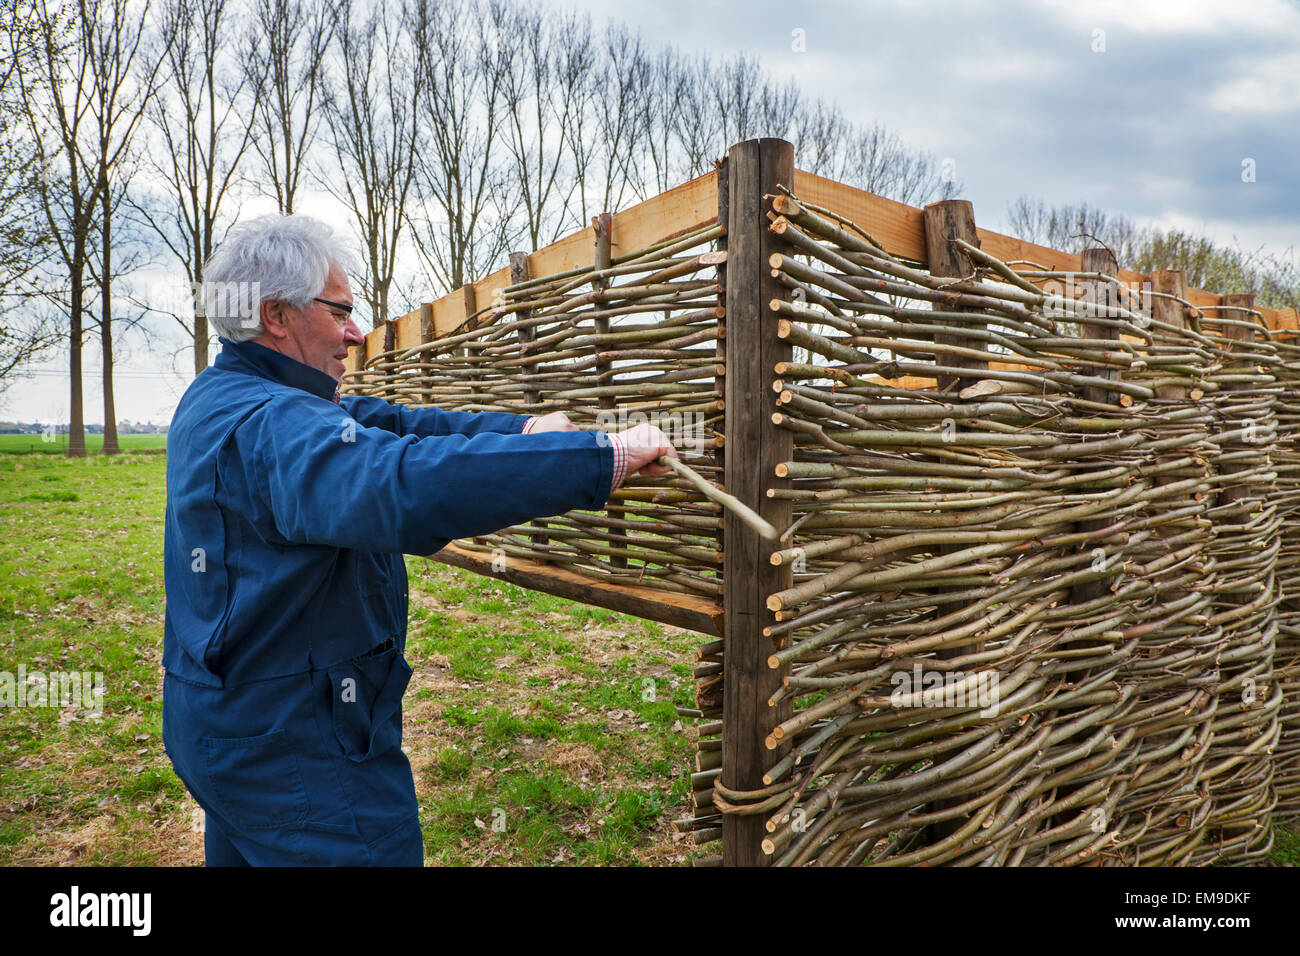 Craftsman making traditional wattle fence by weaving thin willow branches Stock Photo